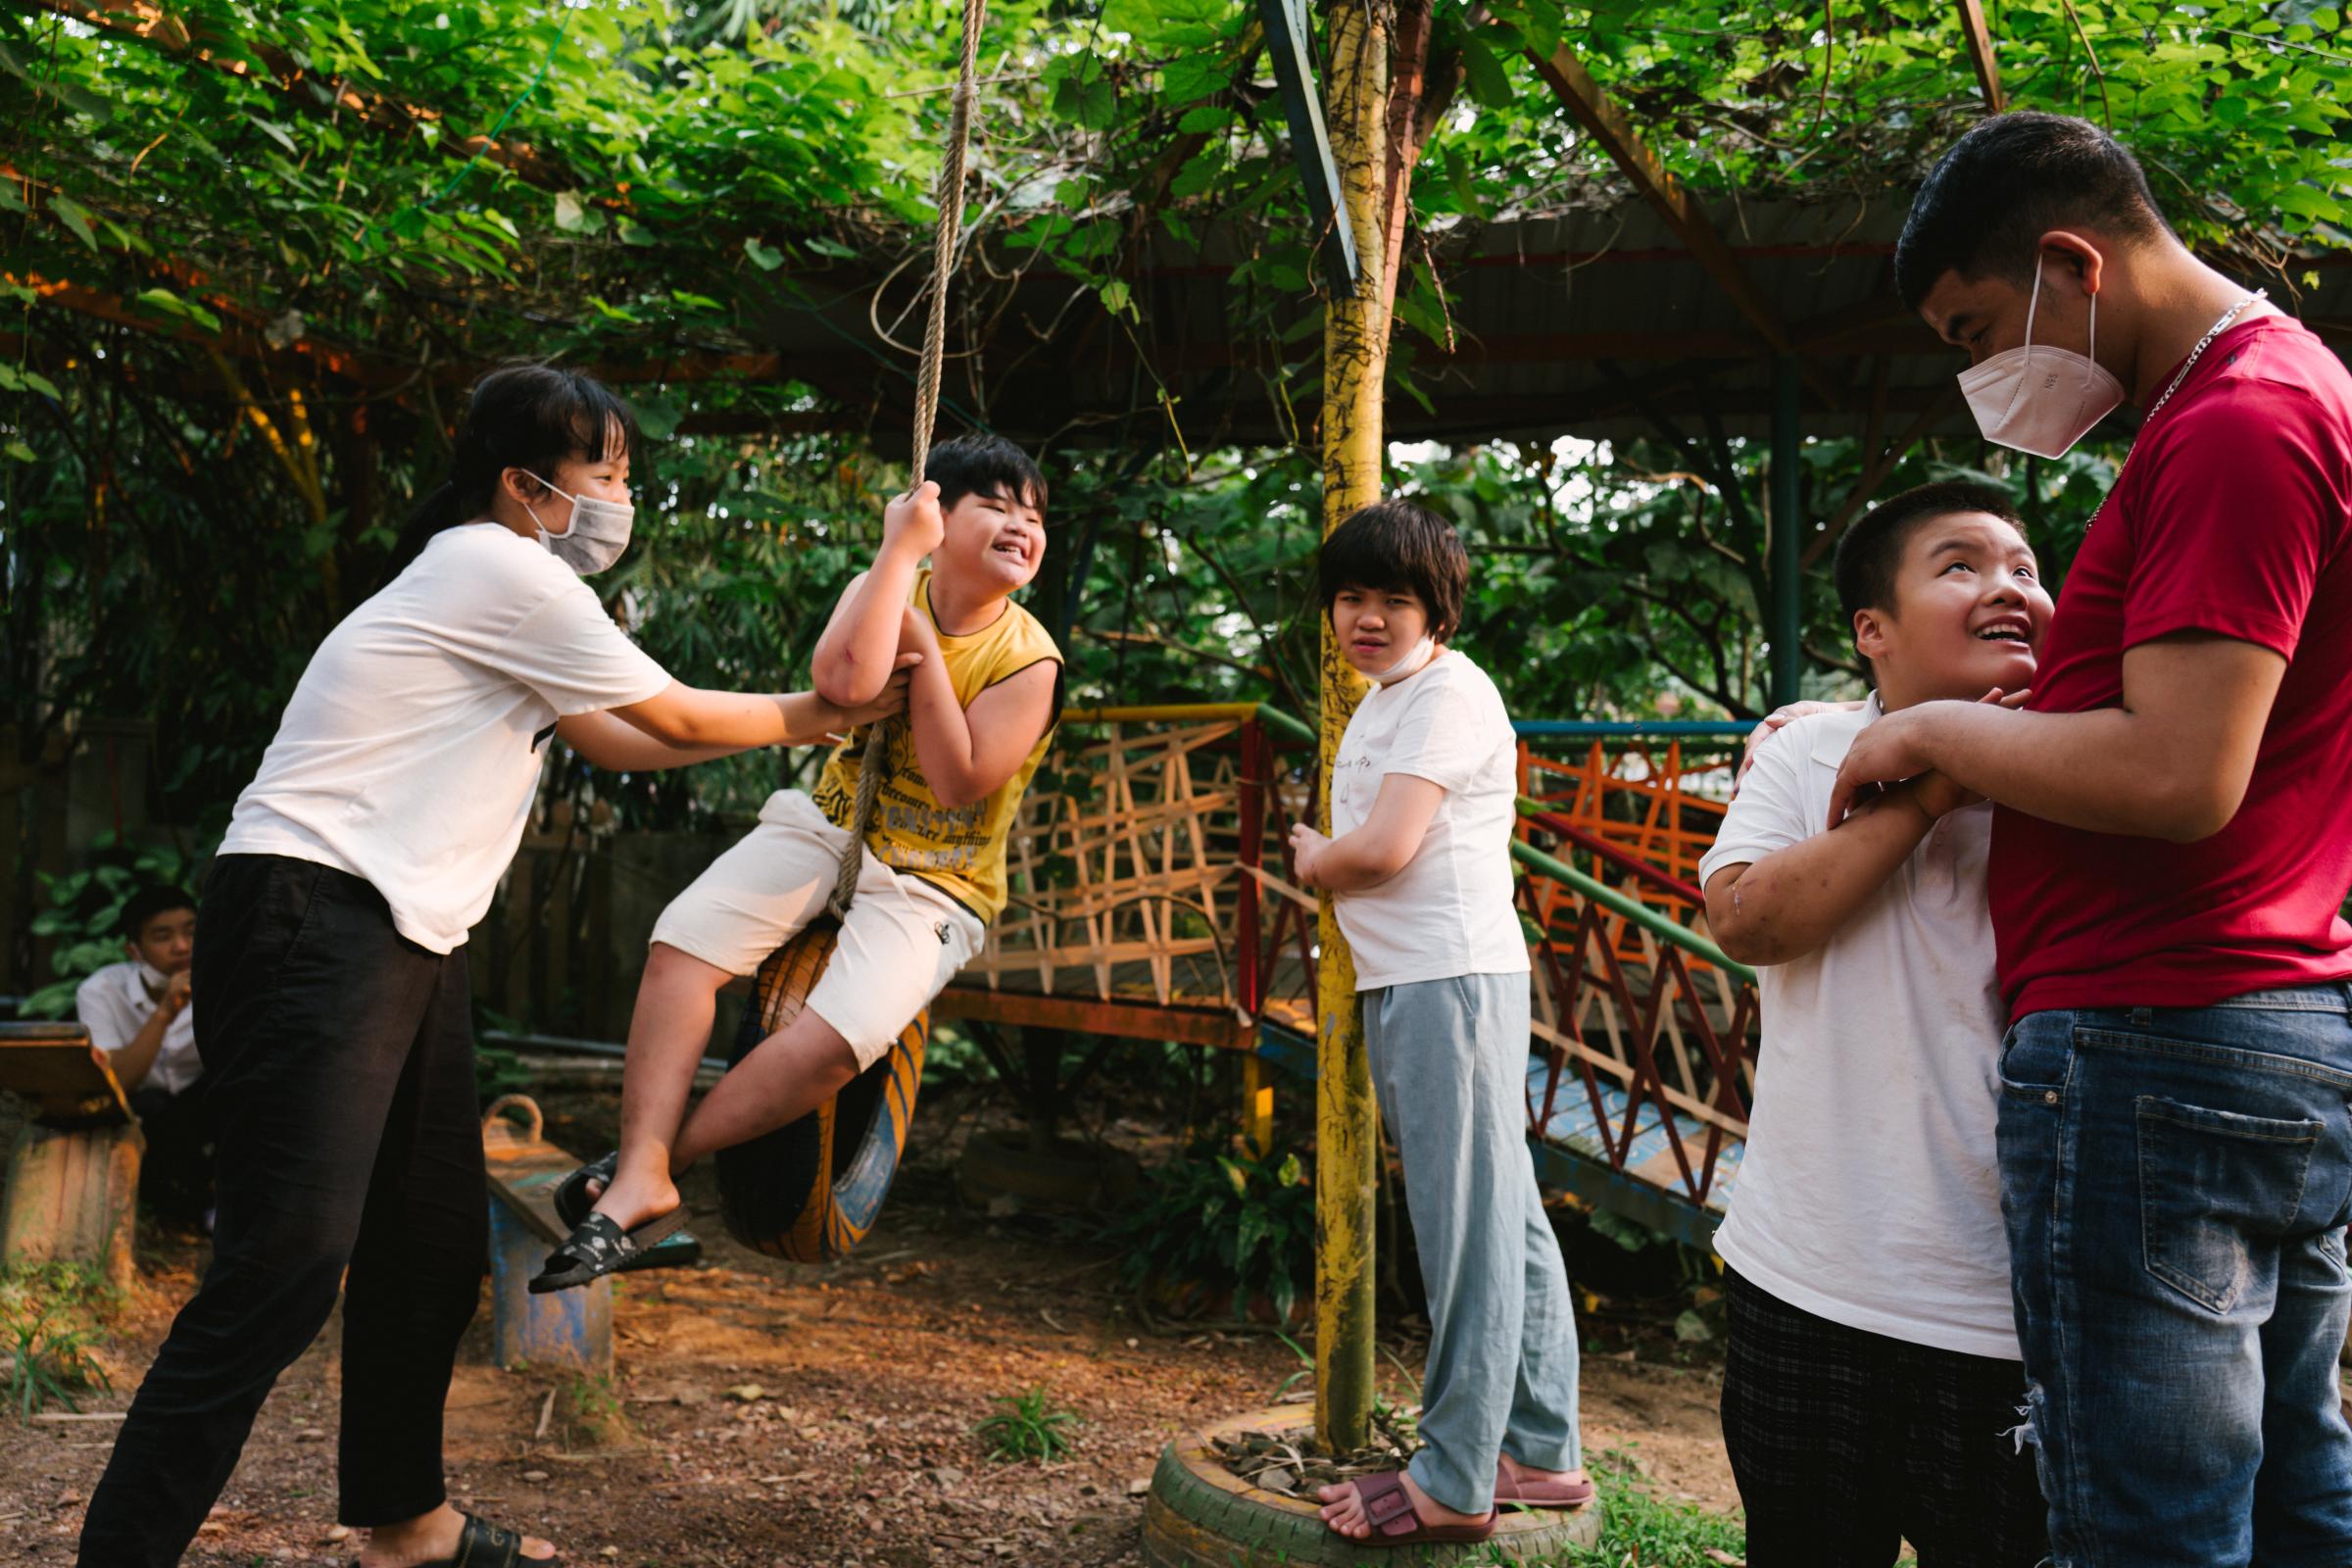 A day in life at Peaceful Bamboo Family - Bright faces during playtime, in the late dimmed twilight...